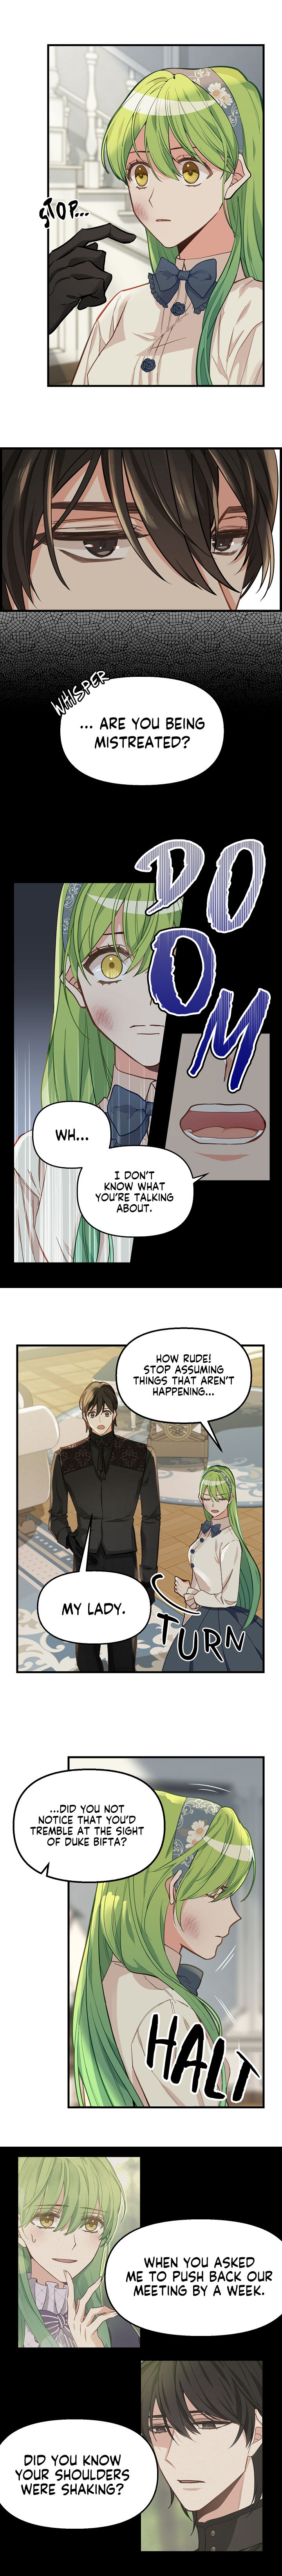 Please Throw Me Away - Chapter 16 Page 3